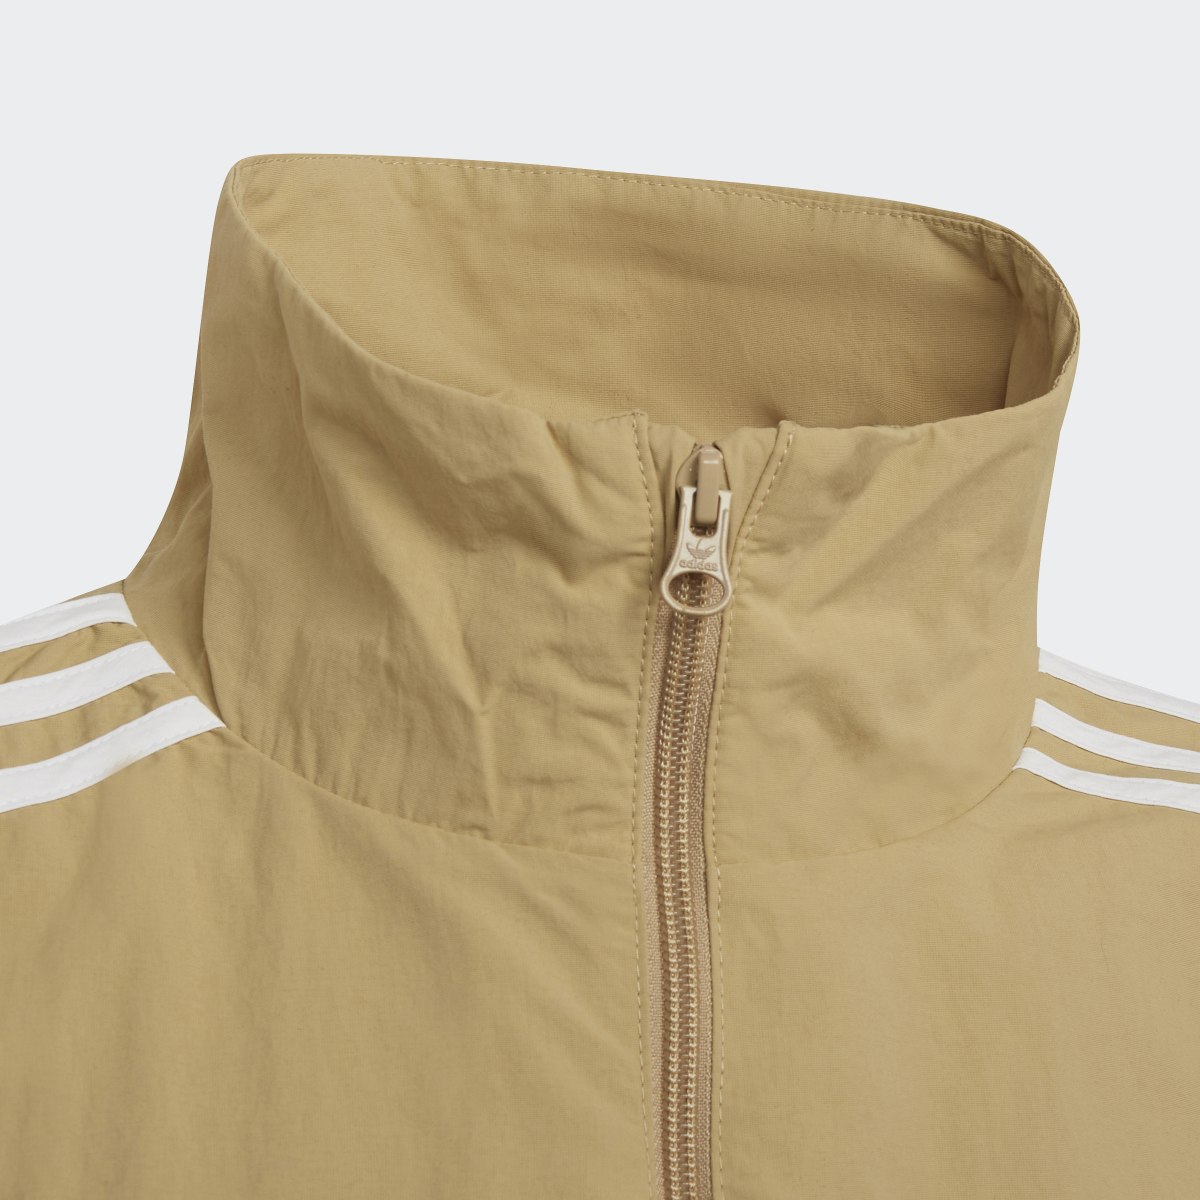 Adidas Track top Woven. 5